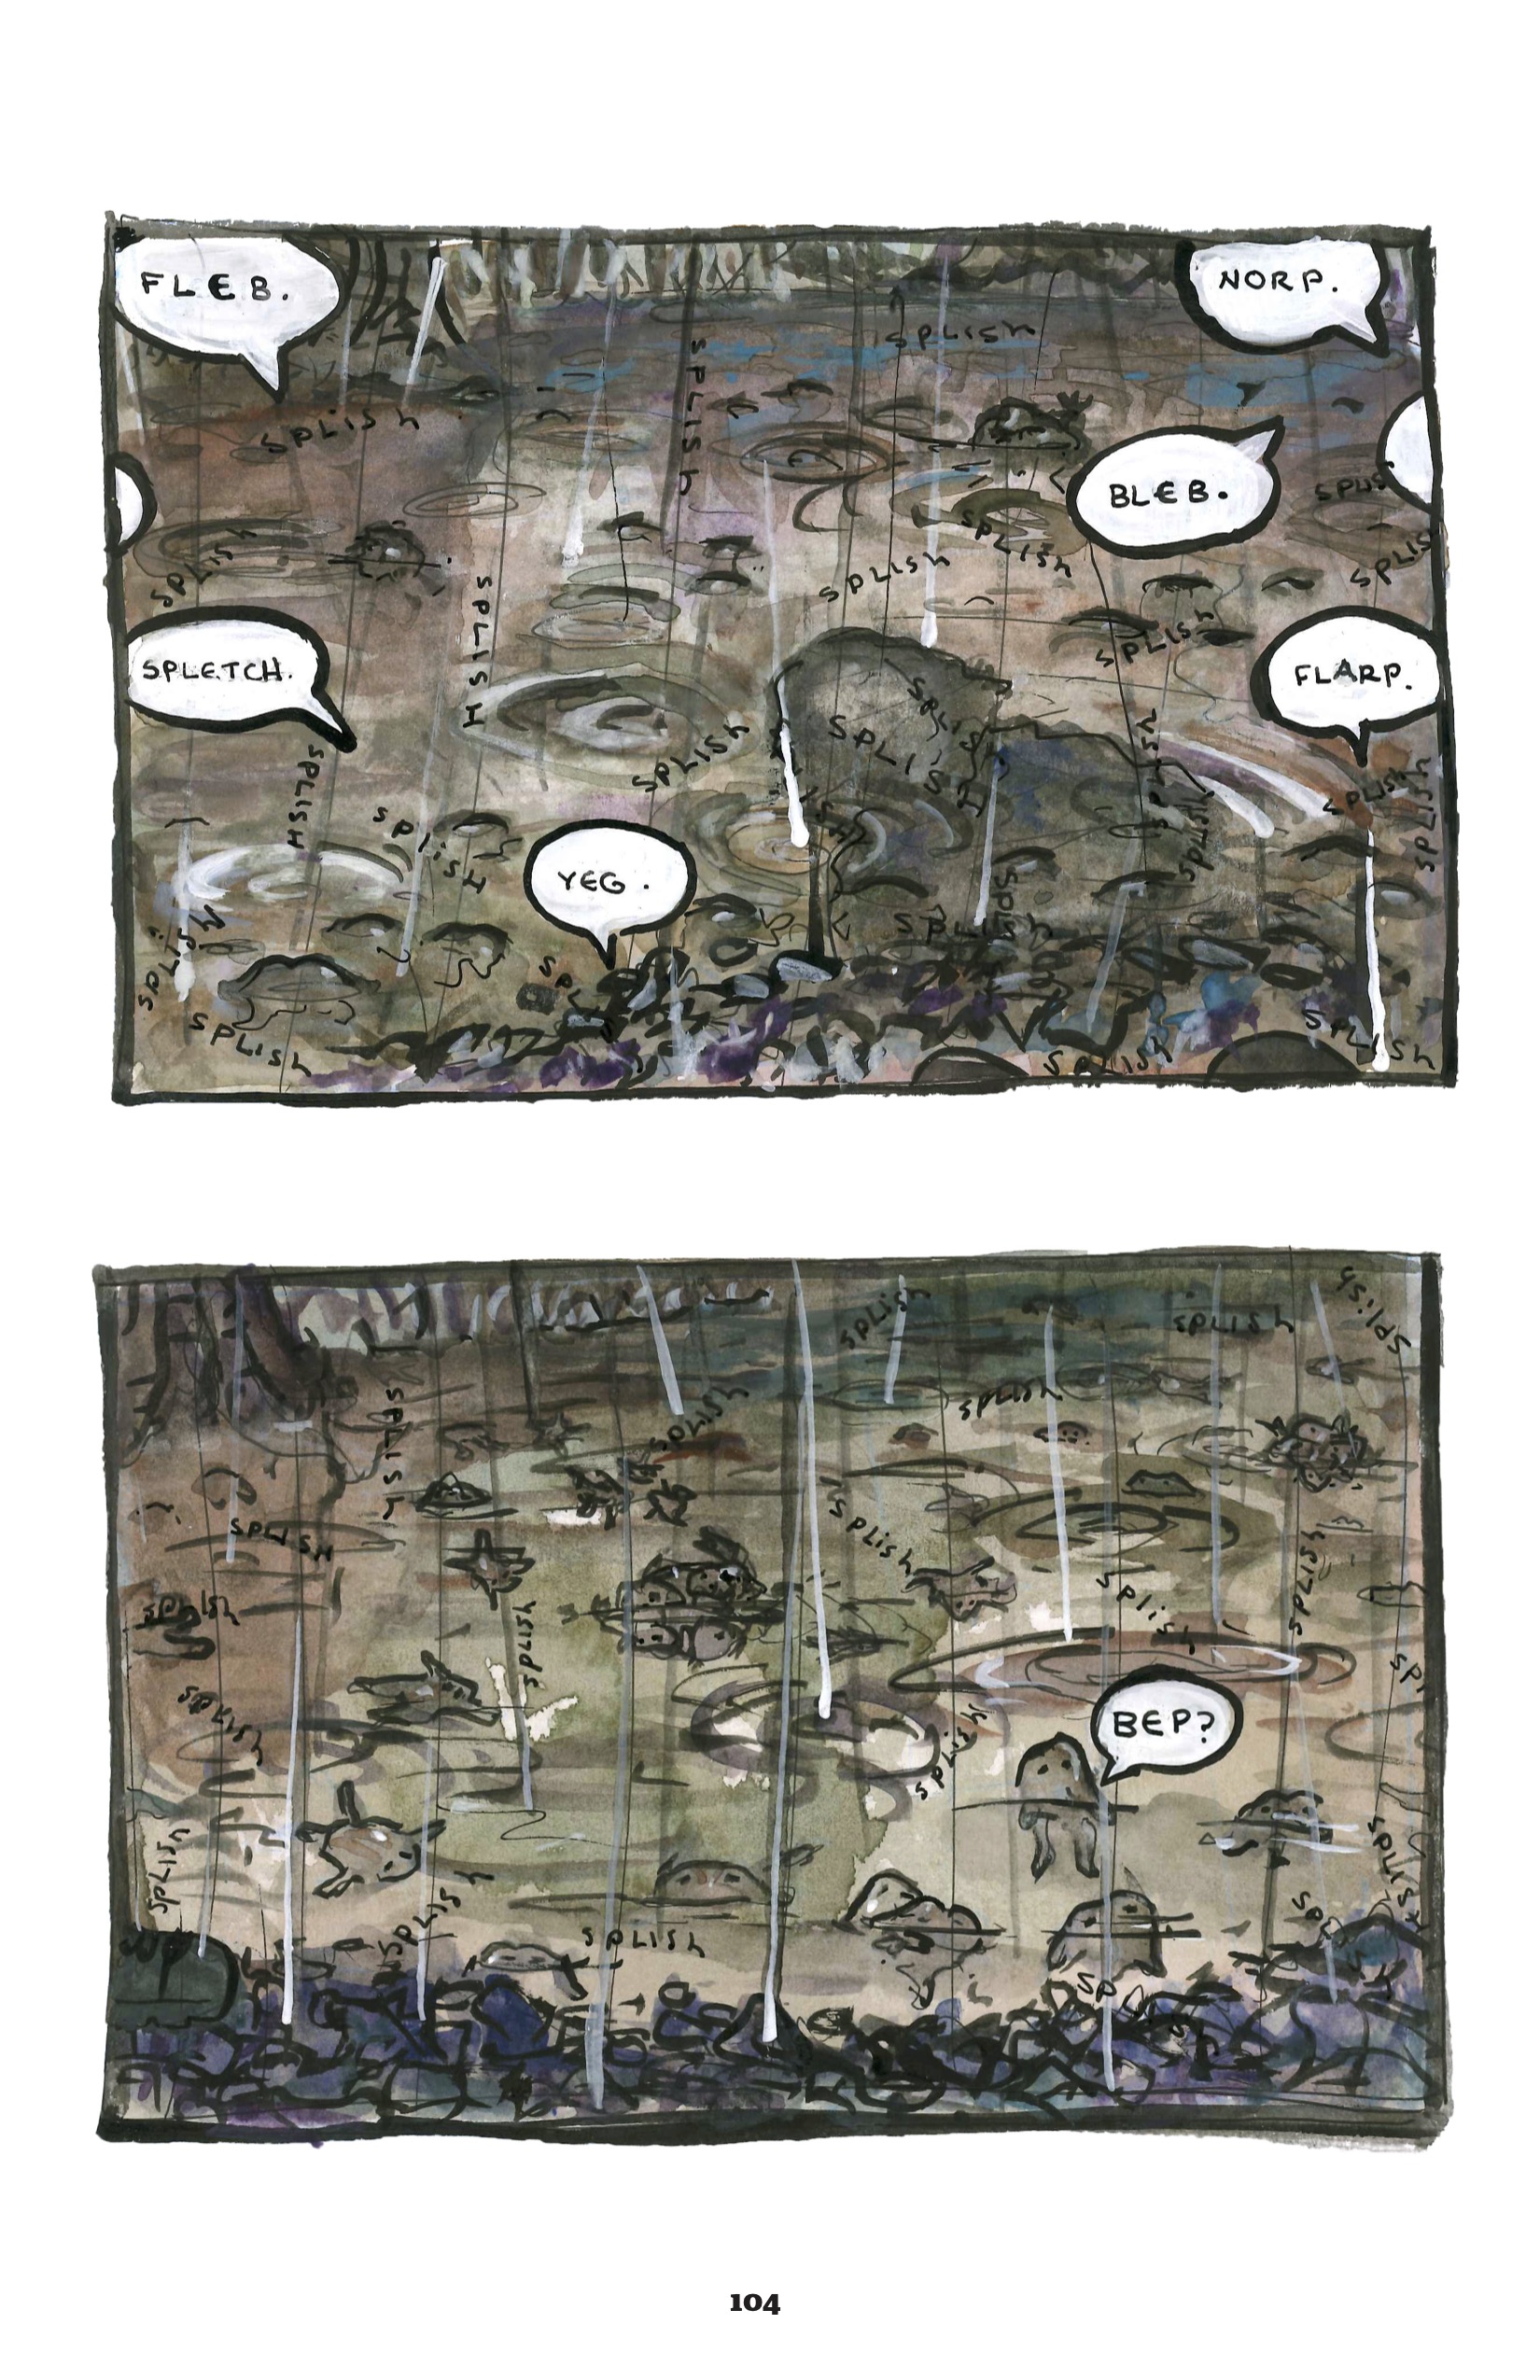 Same page layout as the last - two horizontal panels separated by a wide gutter. There are more greenish browns and blues than purples on this page than before.
1. A view from above of the forest floor, covered in mud and rippling puddles. Speech bubbles come out of it: â€œFLEB. SPLETCH. YEG. NORP. BLEB. FLARP.â€ The splishing sounds are still camouflaged in the landscape.
2. A similar view as the last panel, except now there are lots of frogs swimming in the puddles and mud. One looks towards there reader and says, â€œBep?"